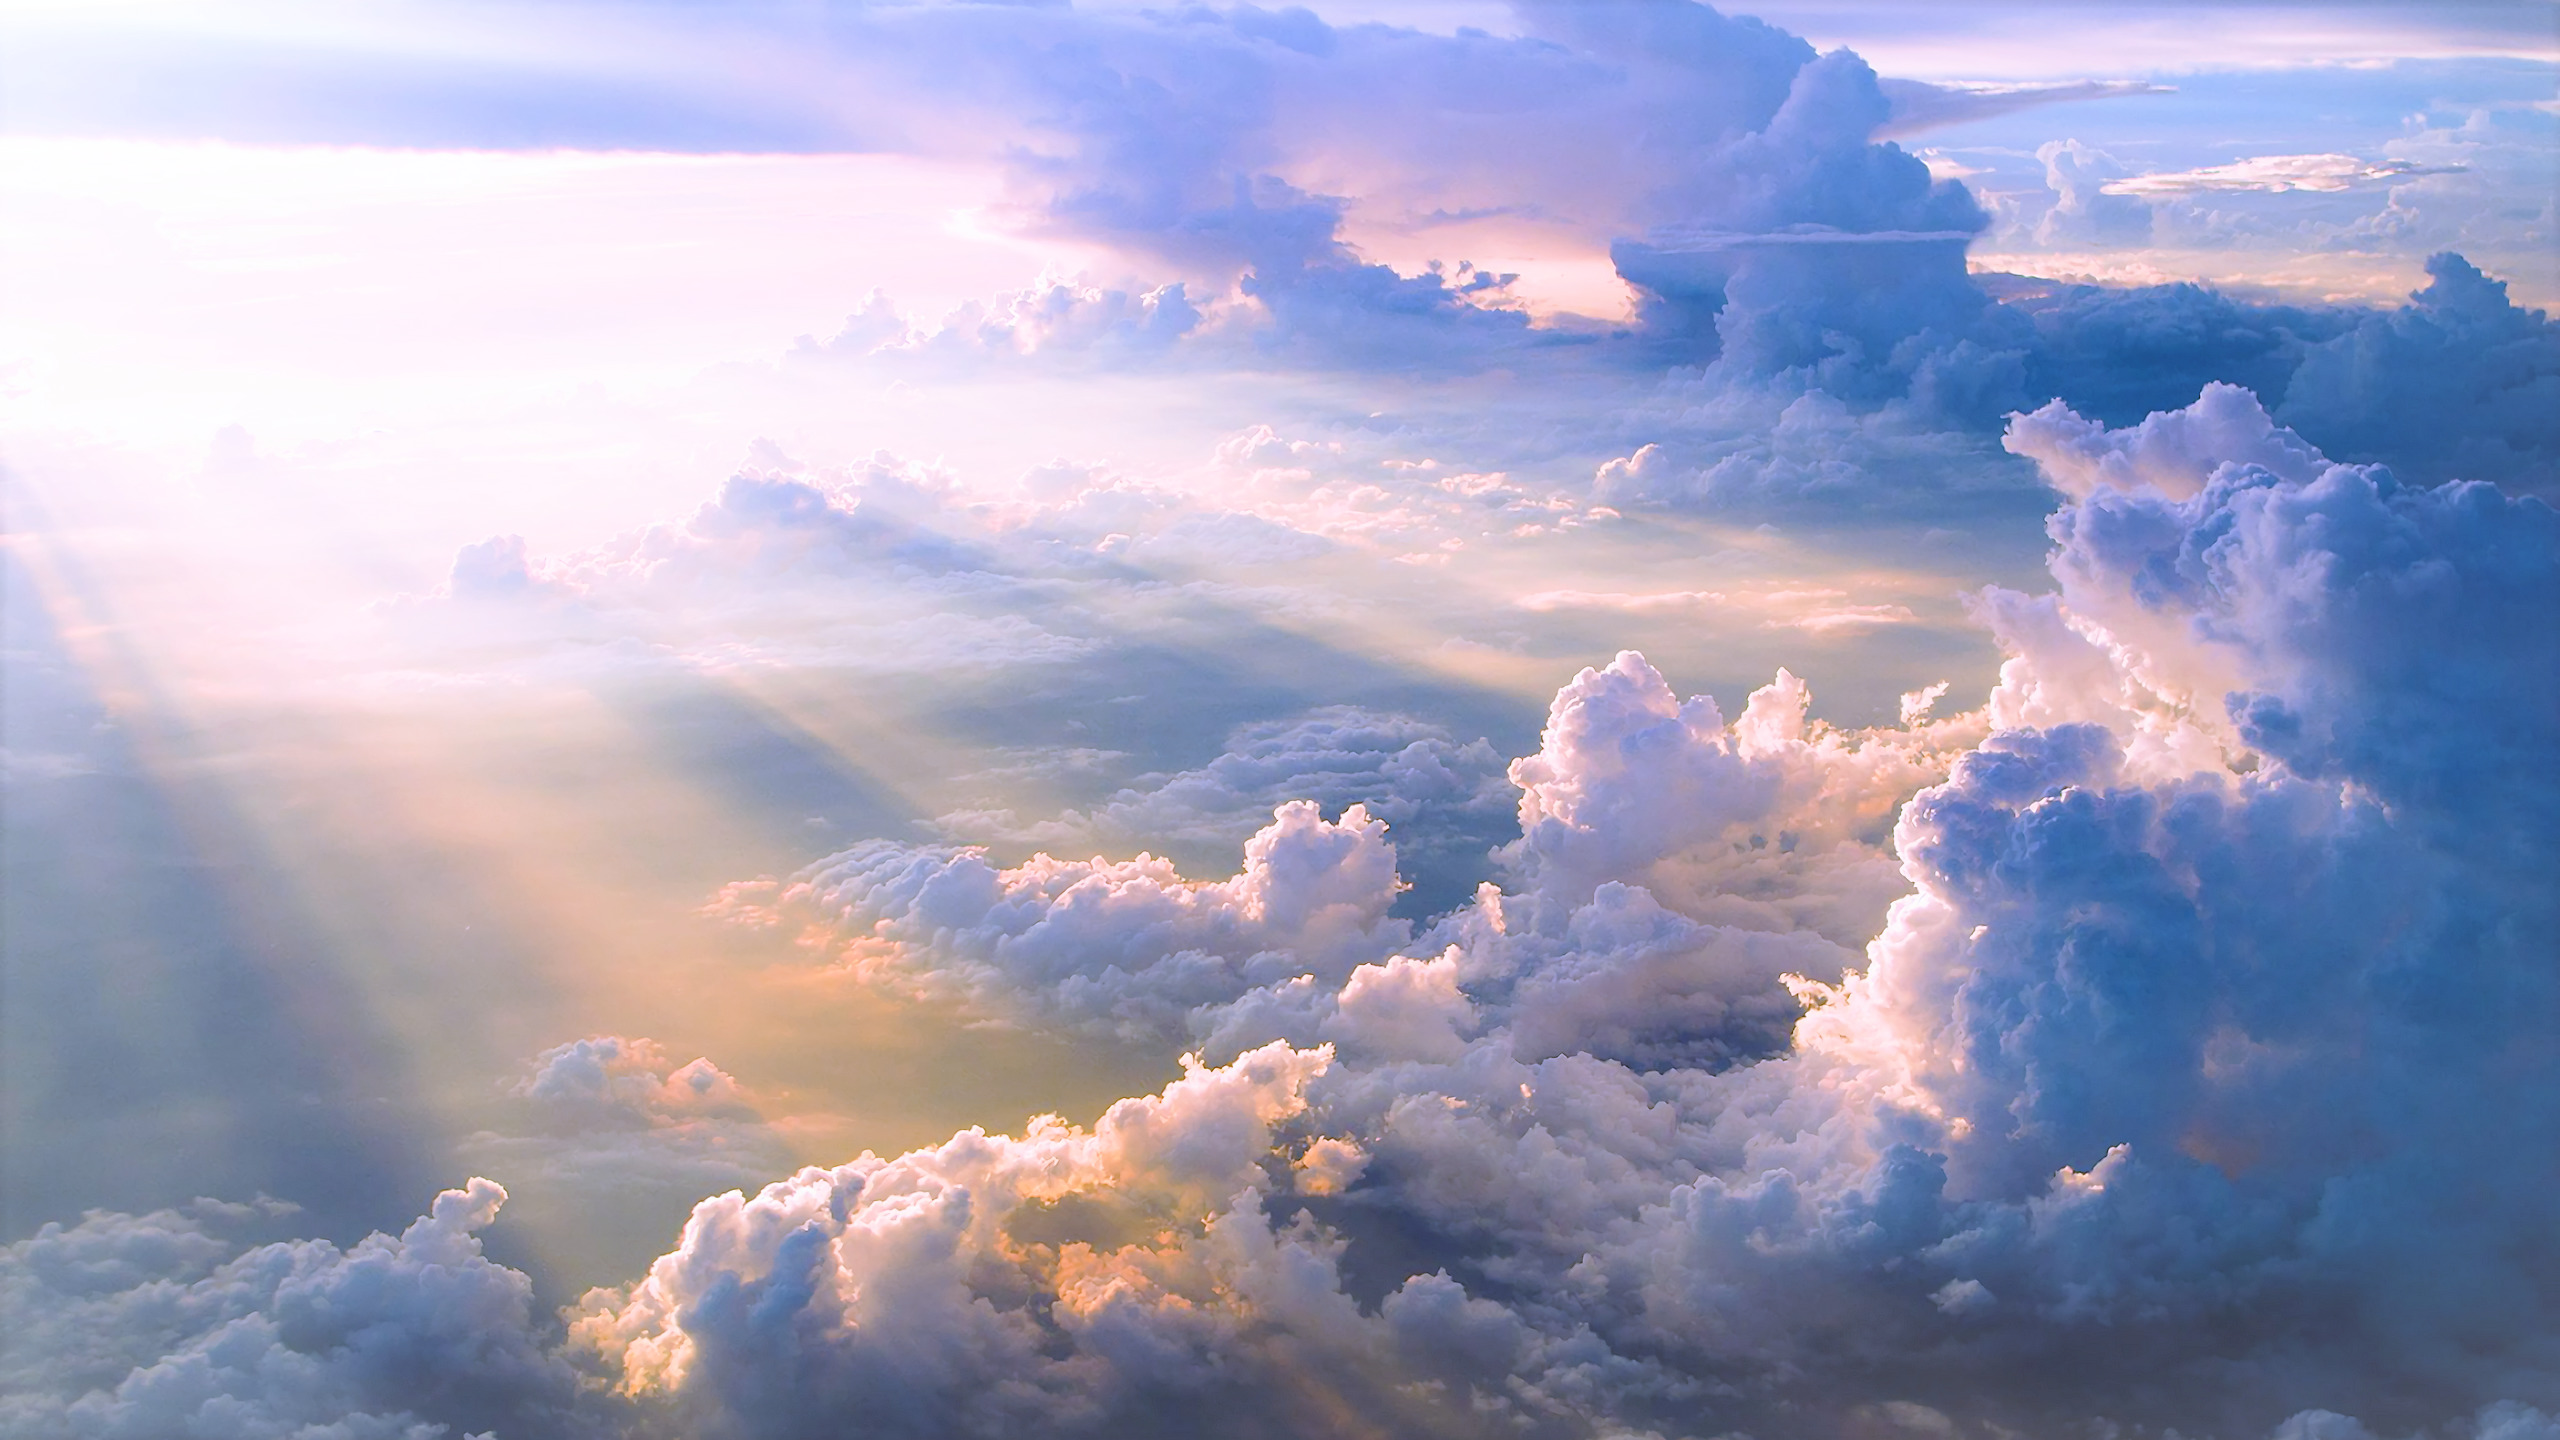 Sky Clouds Wallpapers Hd Desktop And Mobile Backgrounds - Bank2home.com